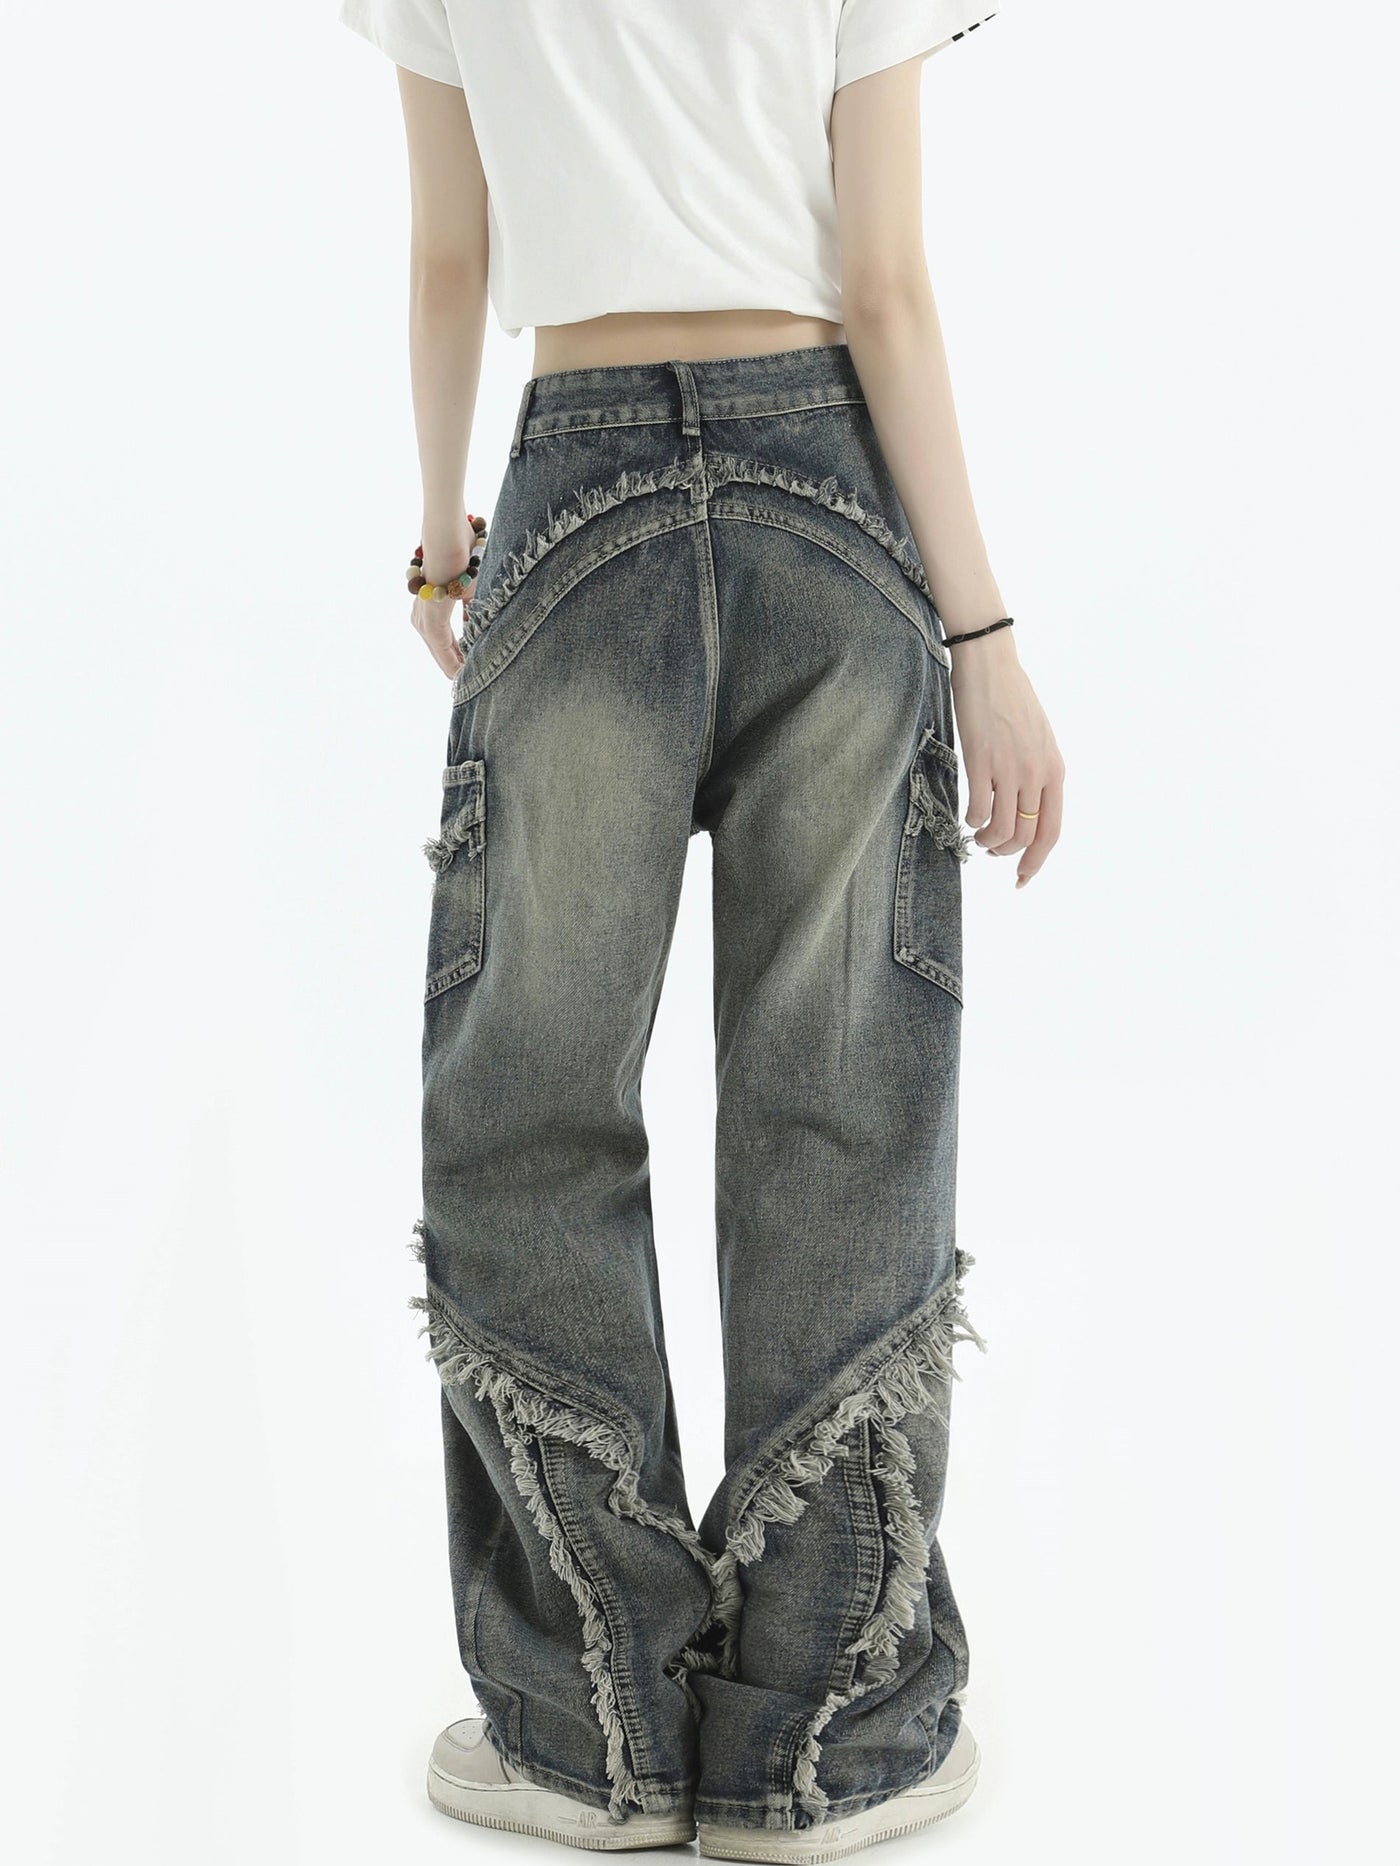 Washed Classic Style Korean Street Fashion Jeans By INS Korea Shop Online at OH Vault